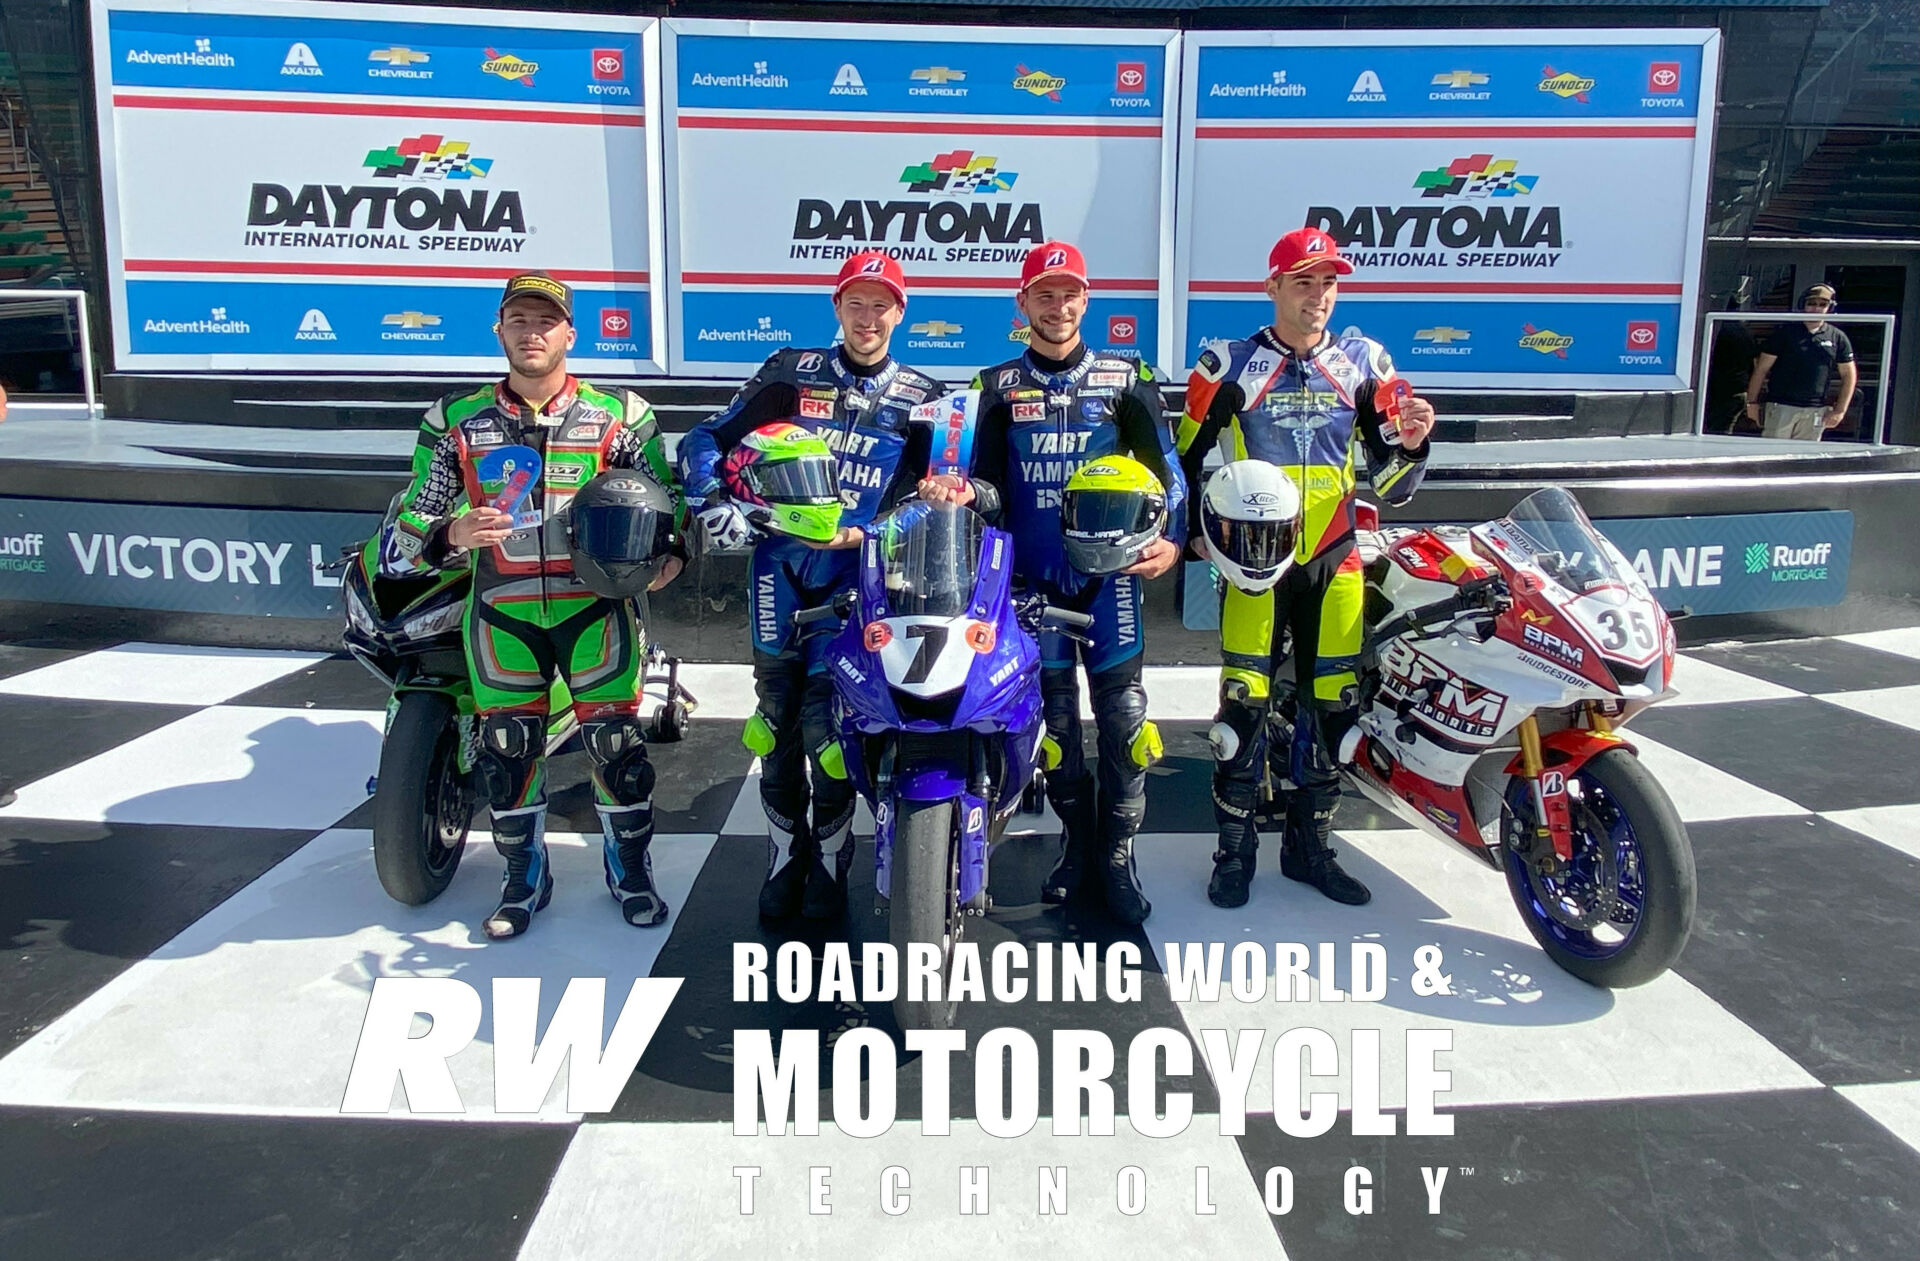 YART Yamaha's Marvin Fritz (second from left) and Karel Hanika (second from right), runner-up Max Angles (far left), and third-place finisher Diego Garcia (far right). Photo by David Swarts.